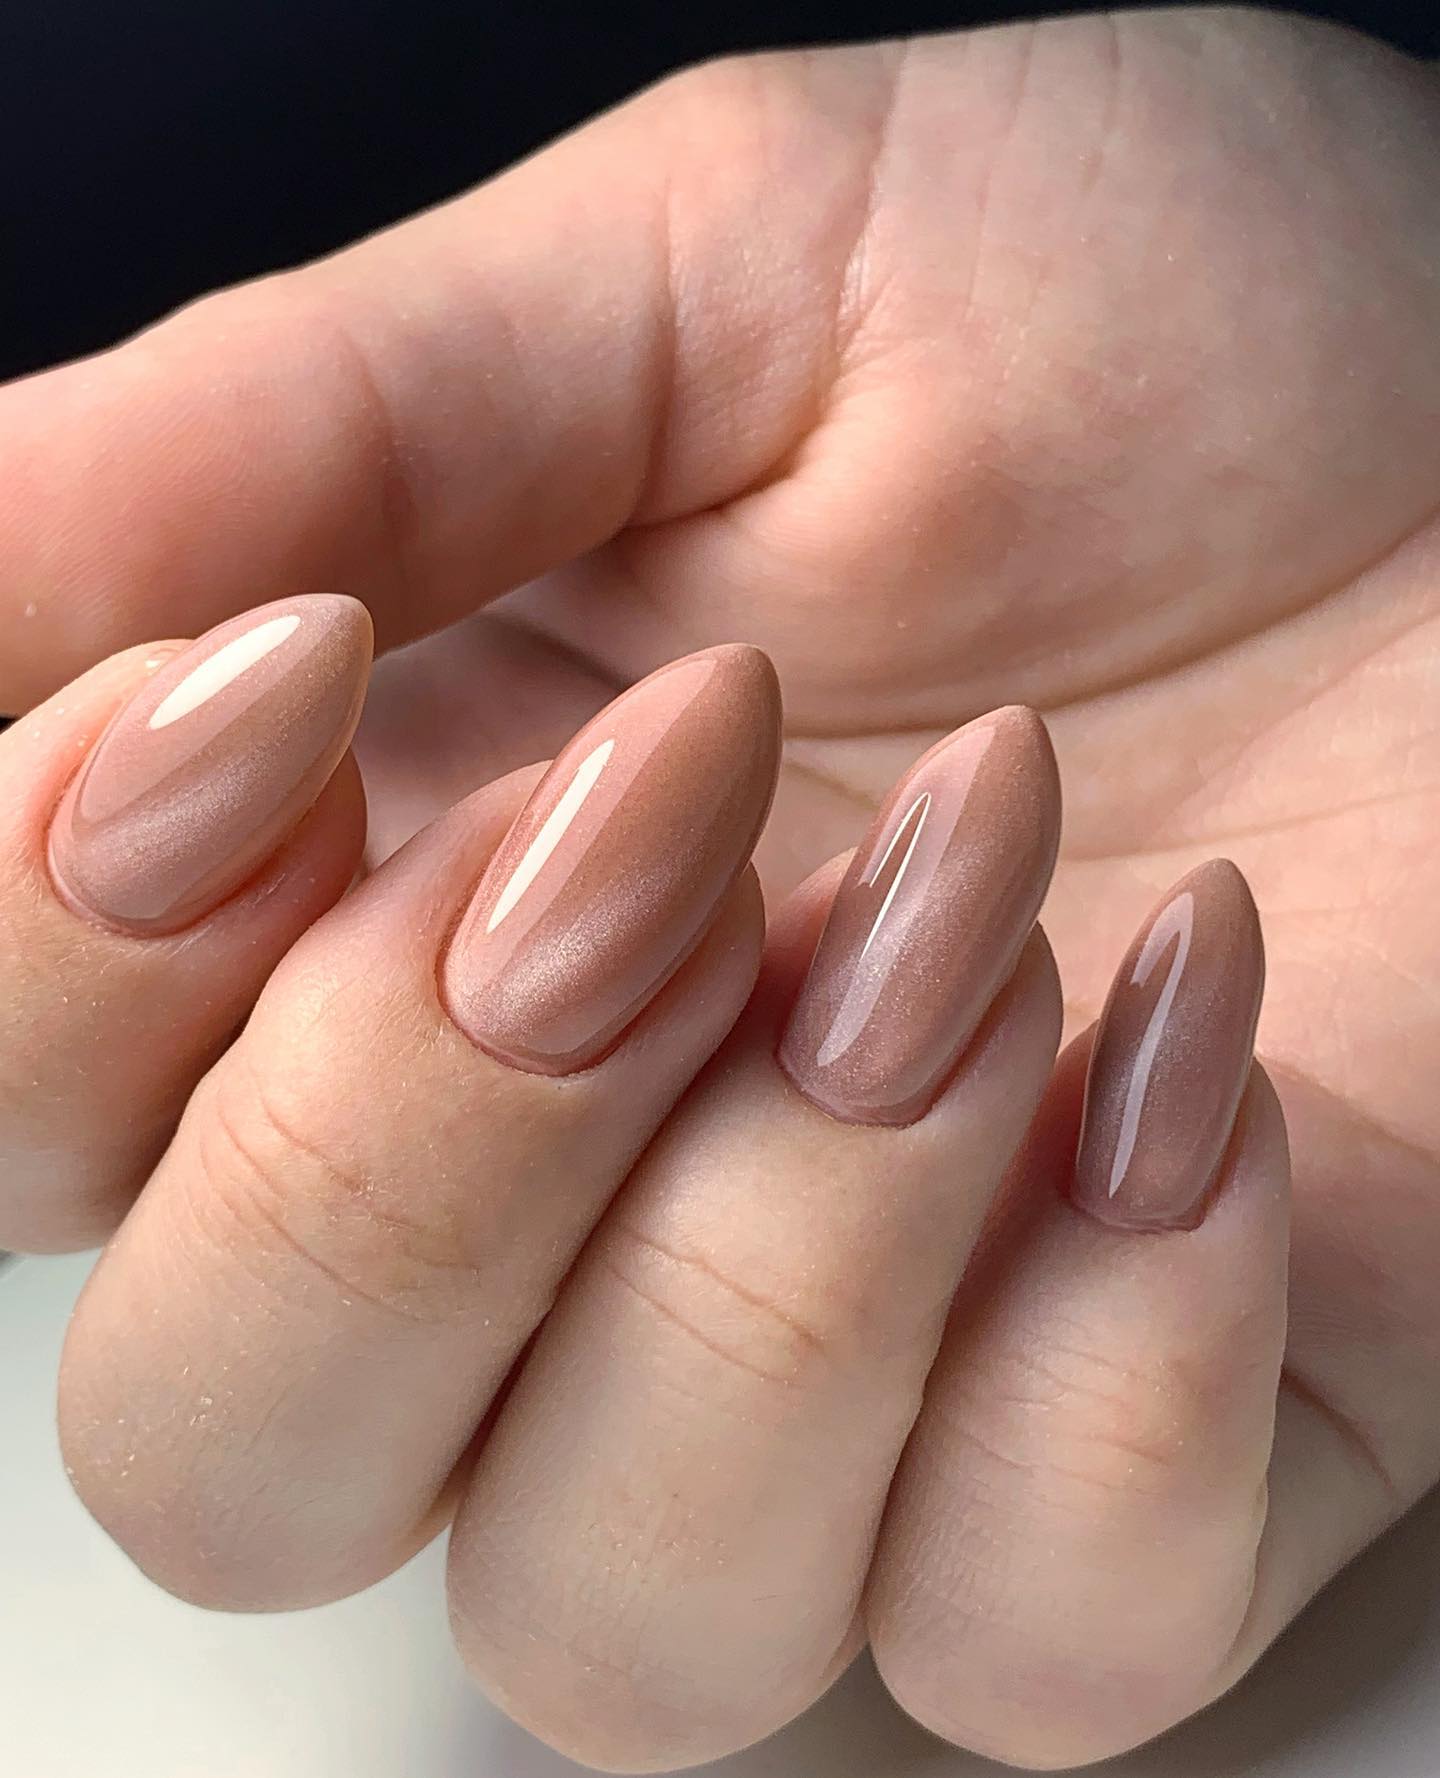 Nude nail polish offers a plain and chic look for everyone. If you want to add your style on your nude nails, you can have a shiny cat eye nail art.